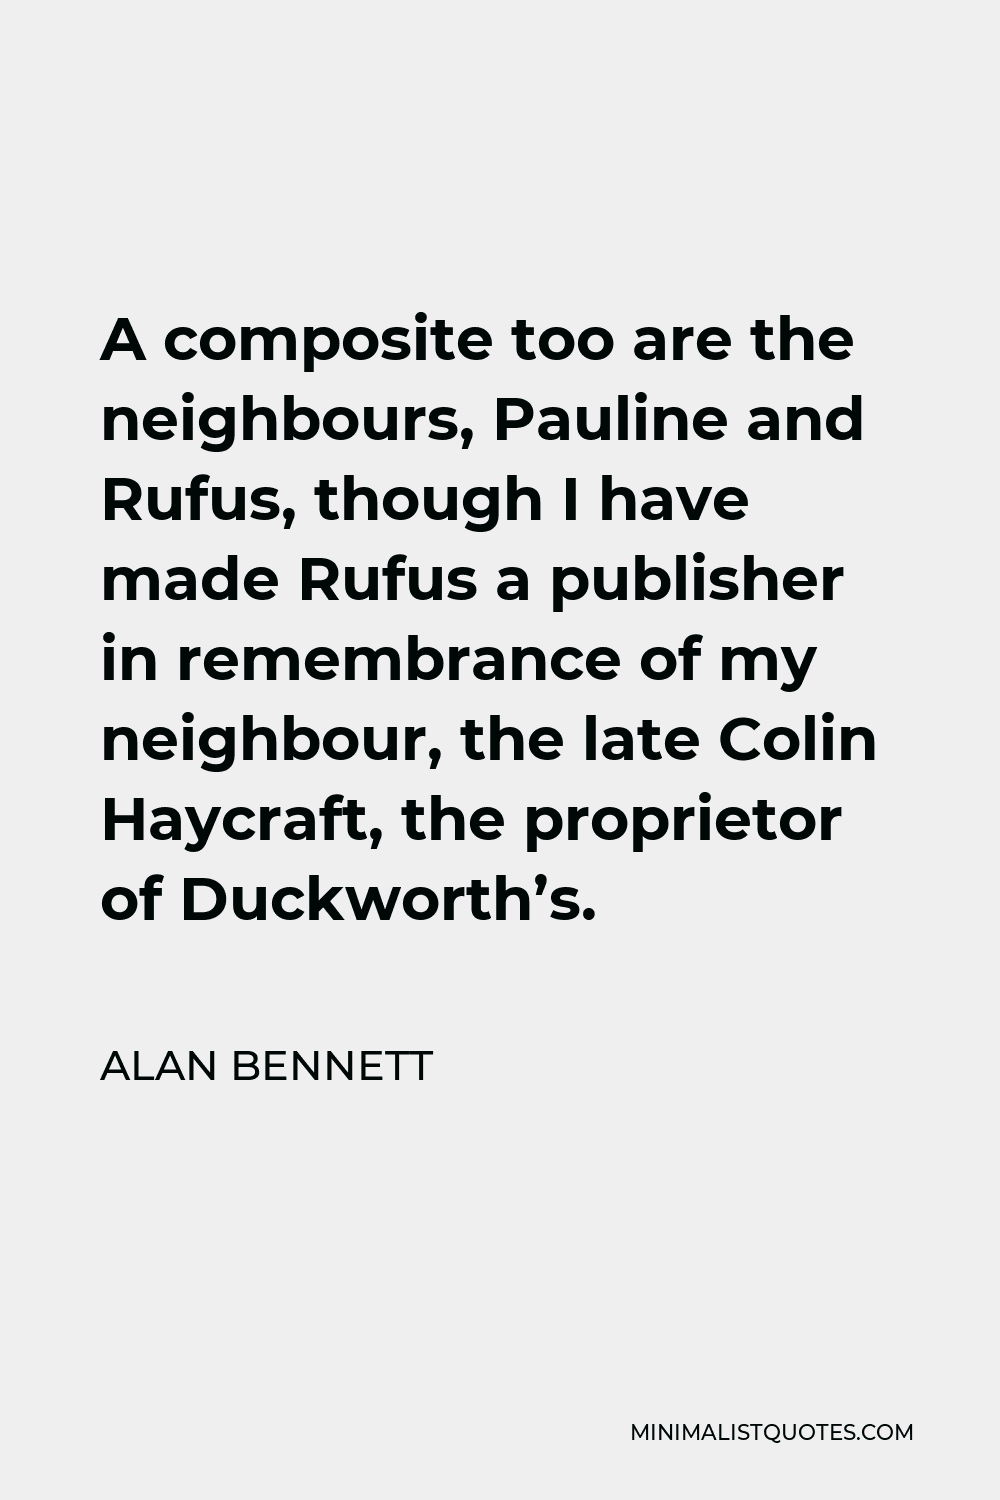 Alan Bennett Quote - A composite too are the neighbours, Pauline and Rufus, though I have made Rufus a publisher in remembrance of my neighbour, the late Colin Haycraft, the proprietor of Duckworth’s.